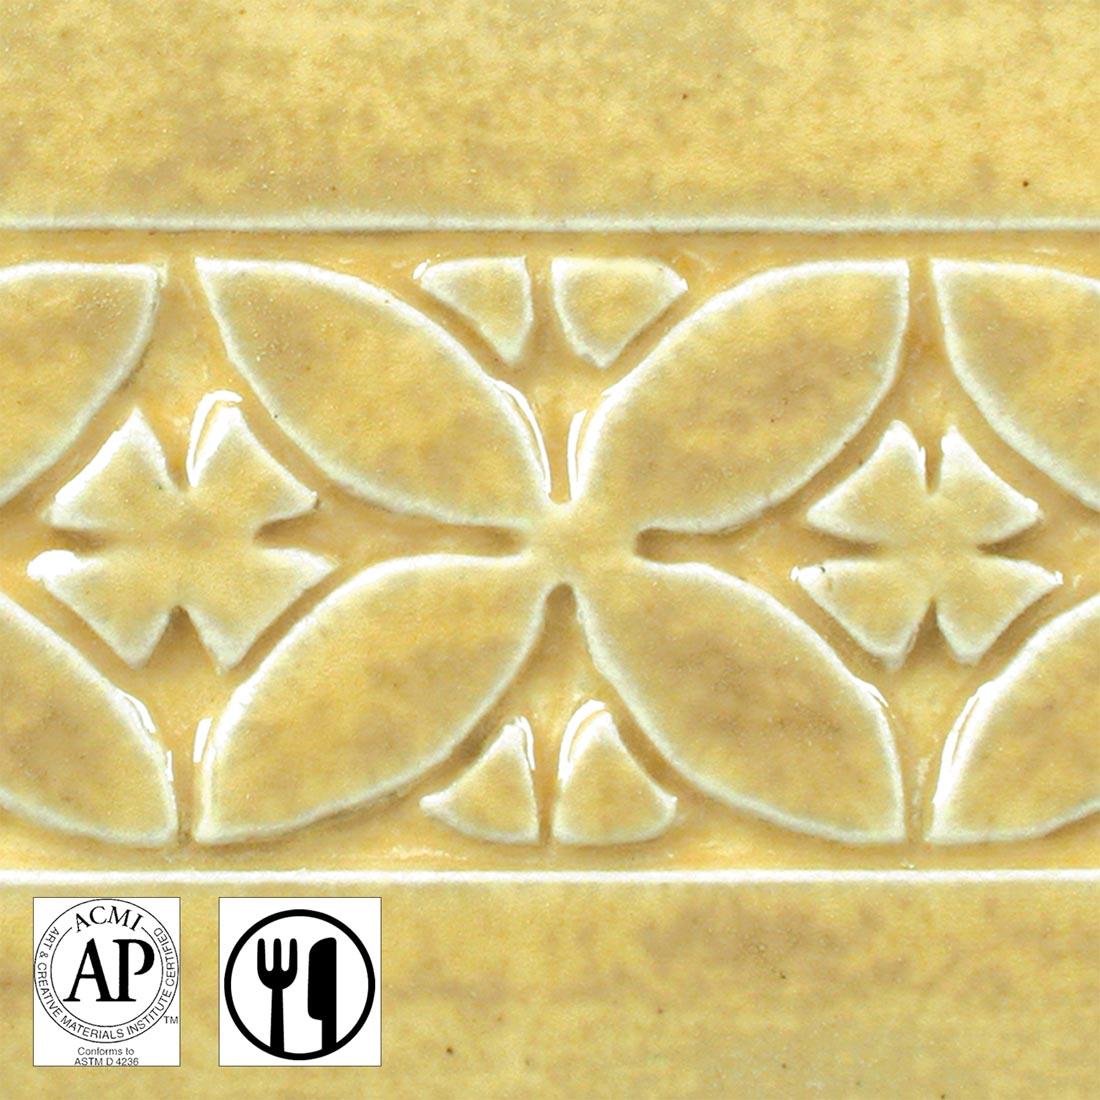 clay tile with Oatmeal AMACO Potter's Choice High Fire Glaze applied; symbols for AP Seal and food safe